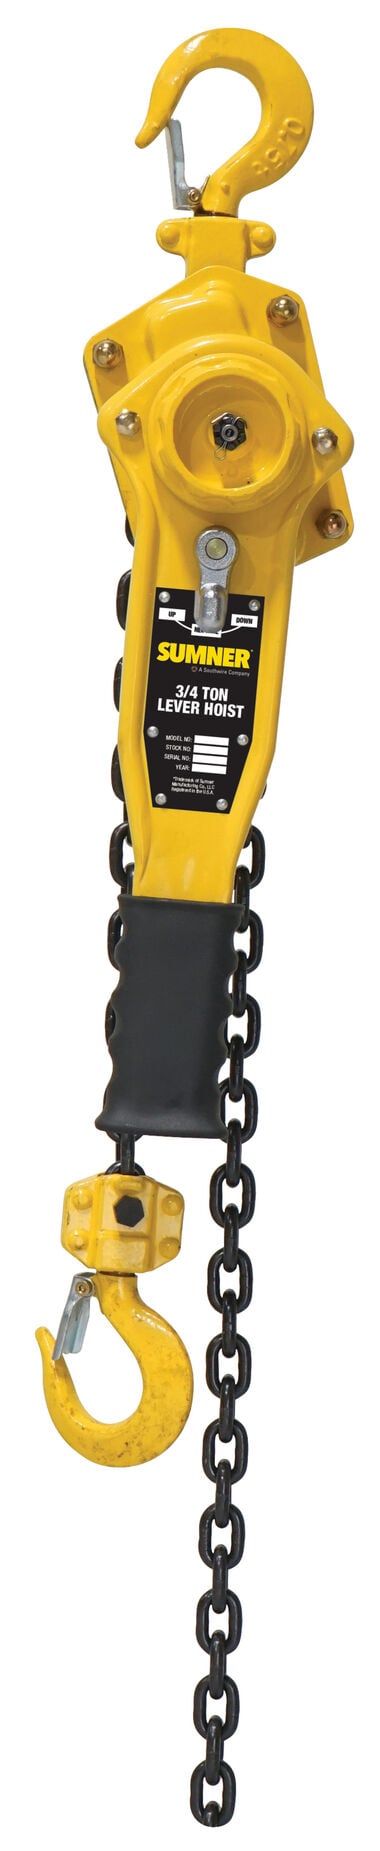 Sumner 3/4 Ton Lever Hoist with 15 ft. Chain Fall